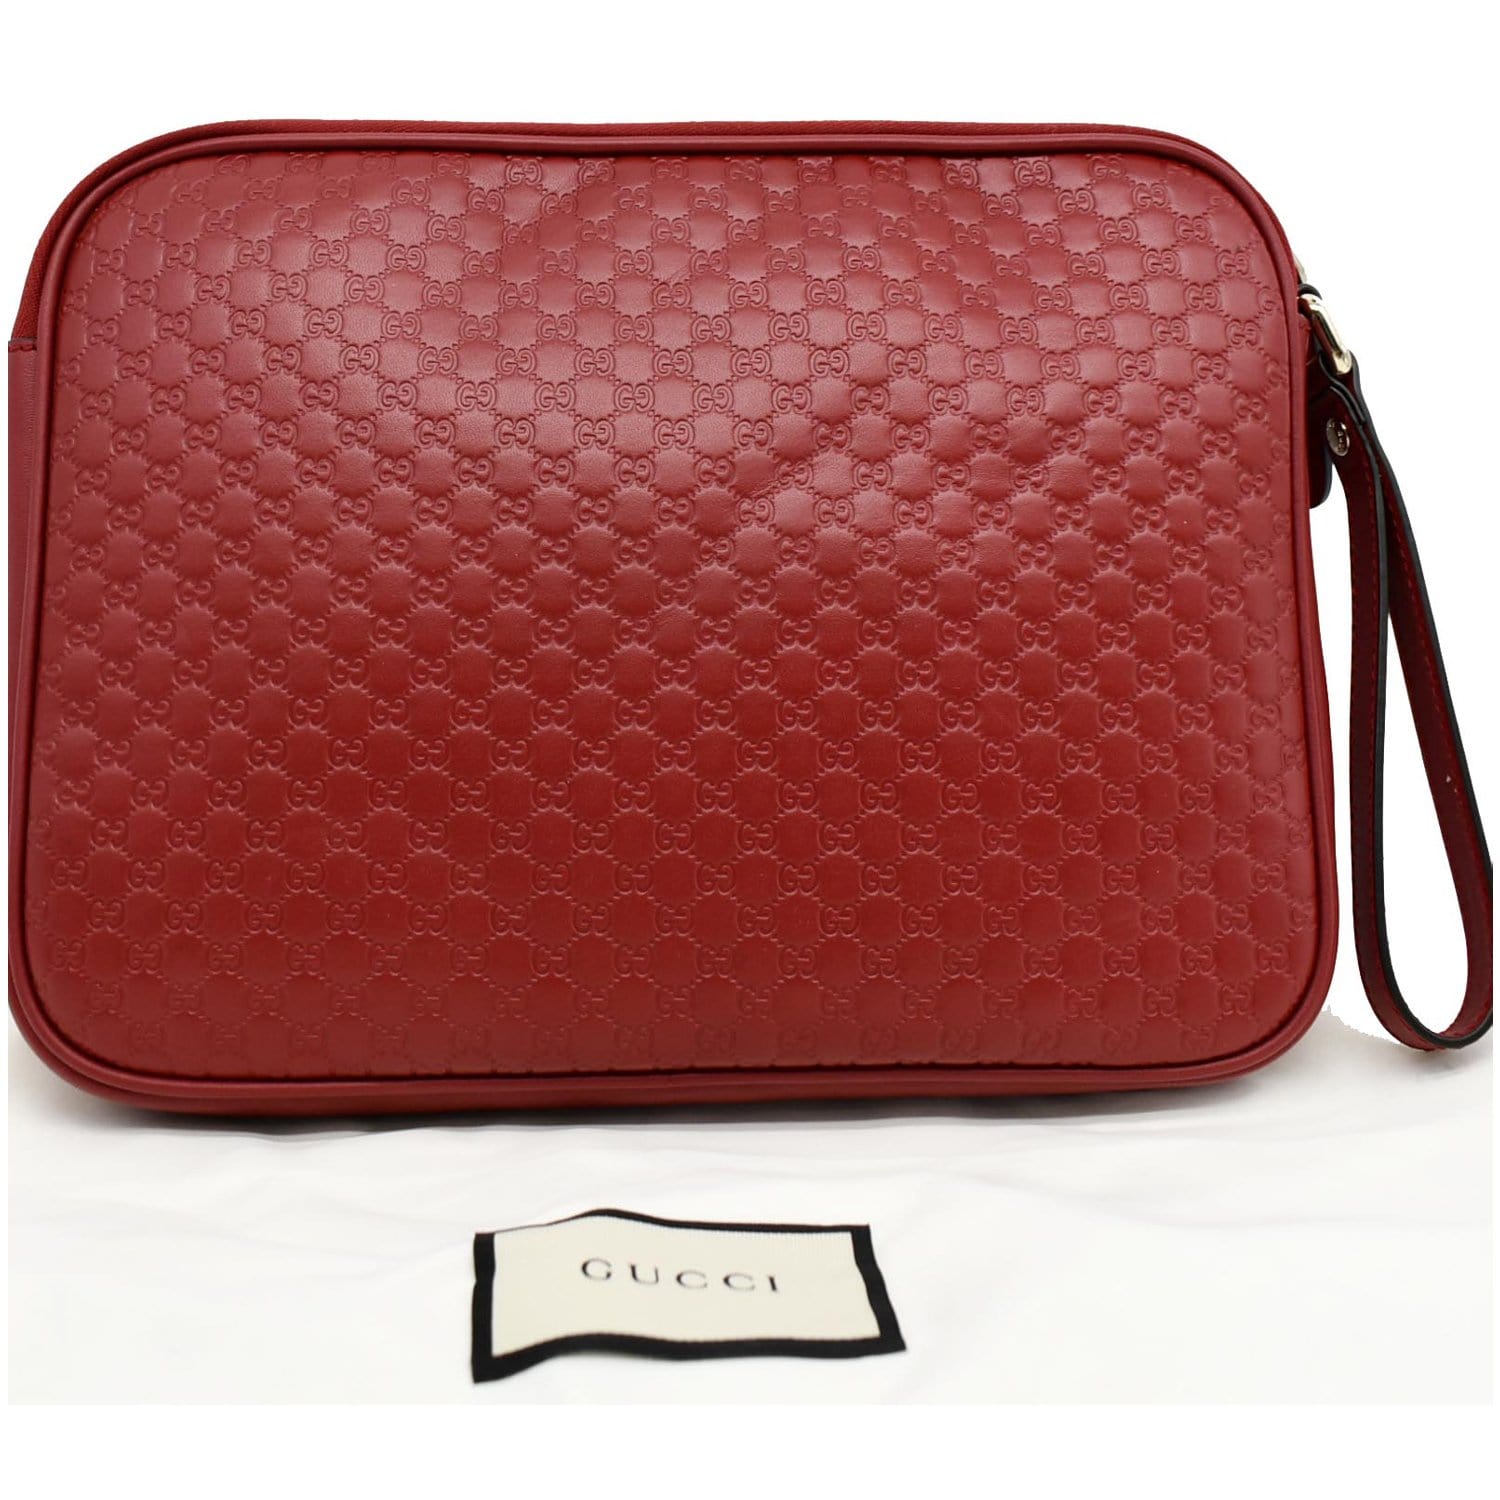 Gucci Red Patent Leather Micro Guccissima 'Nice' Top Handle Bag With Strap  Gucci . Shop The Latest Women's And Men's Collections